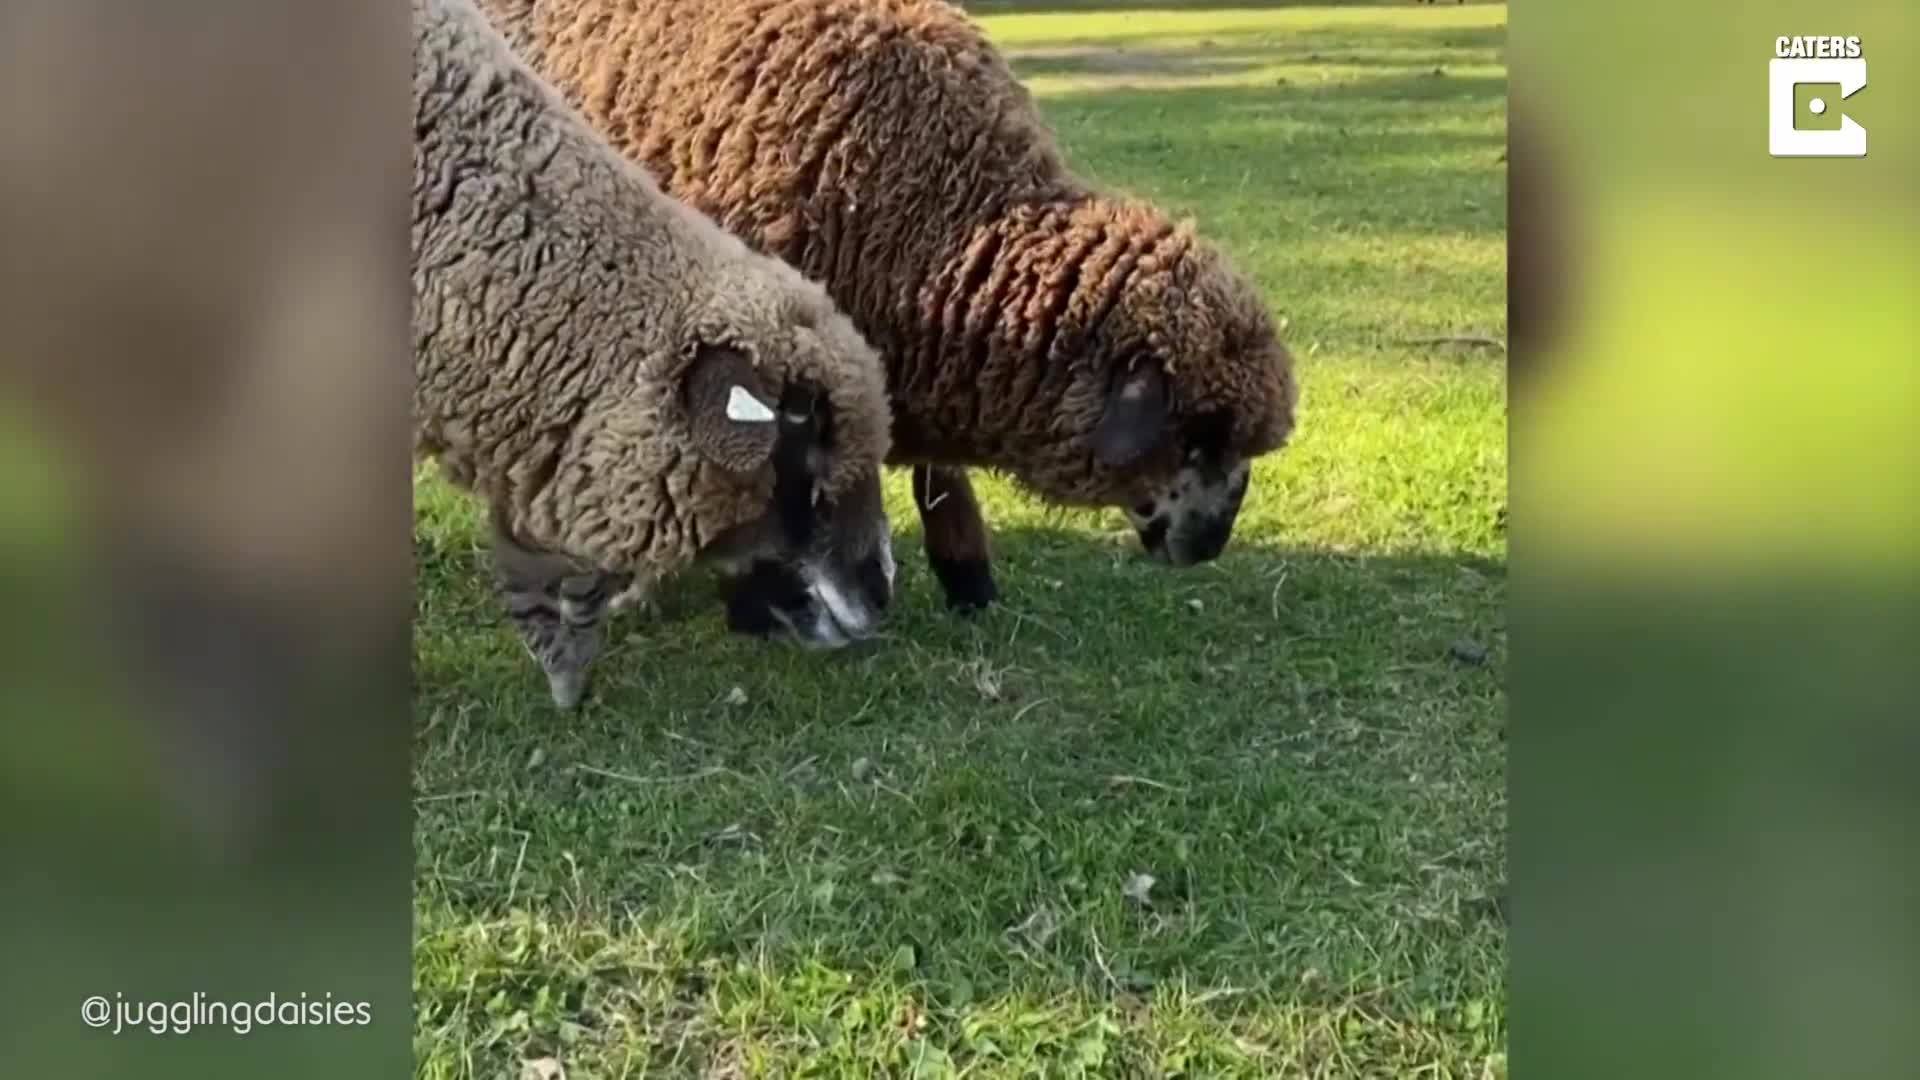 Adorable kitten strokes and cuddles with sheep best friend